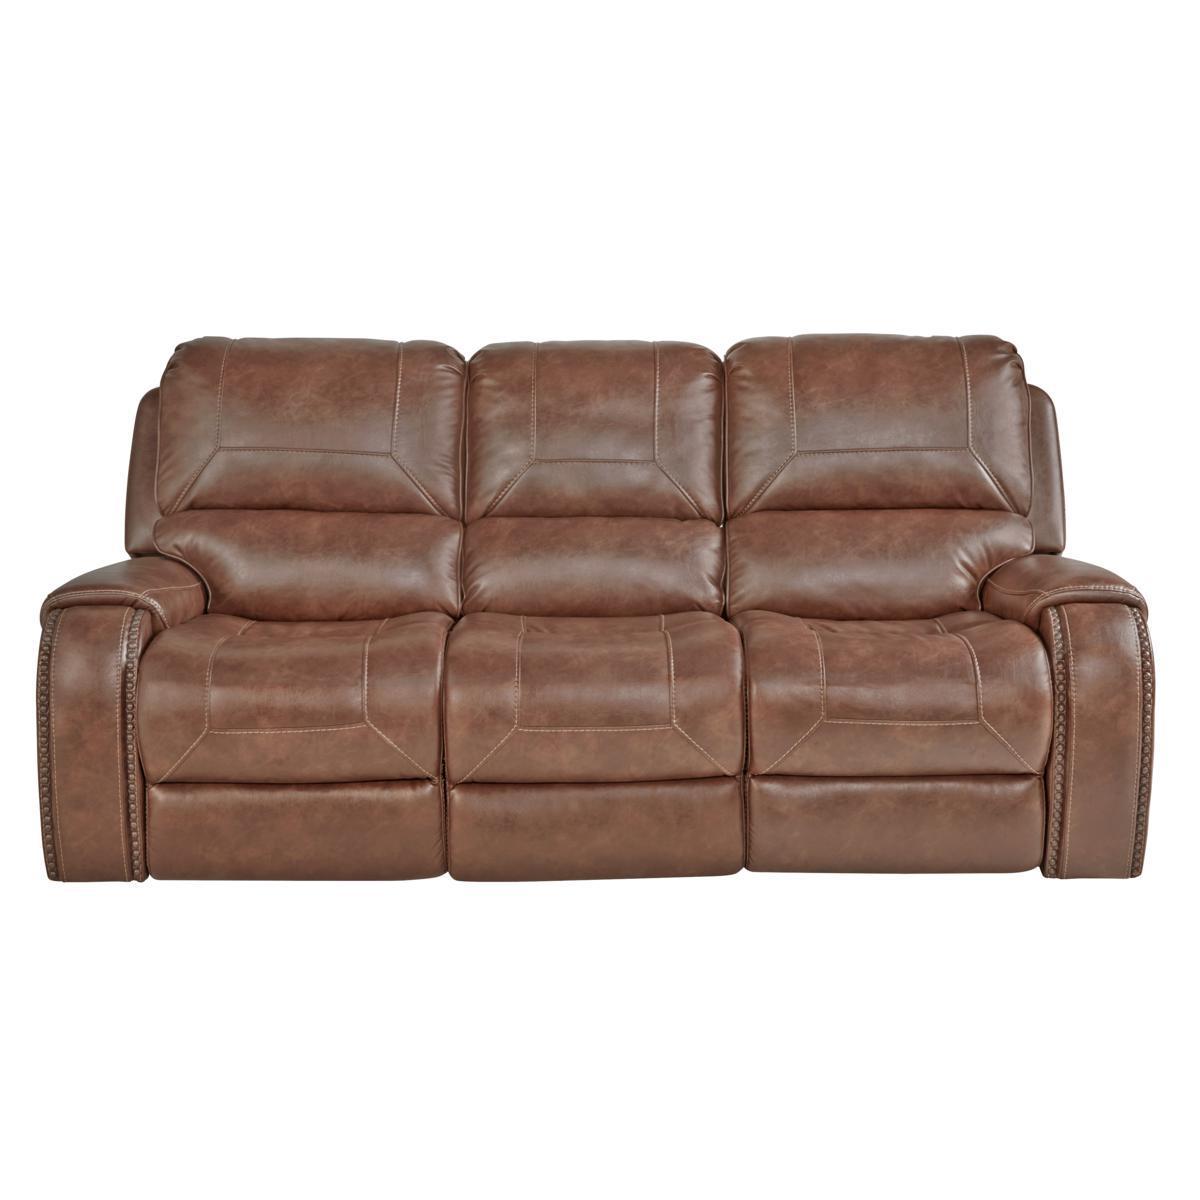 Pulaski Dual Recliner Sofa with Dropdown Charging Console image